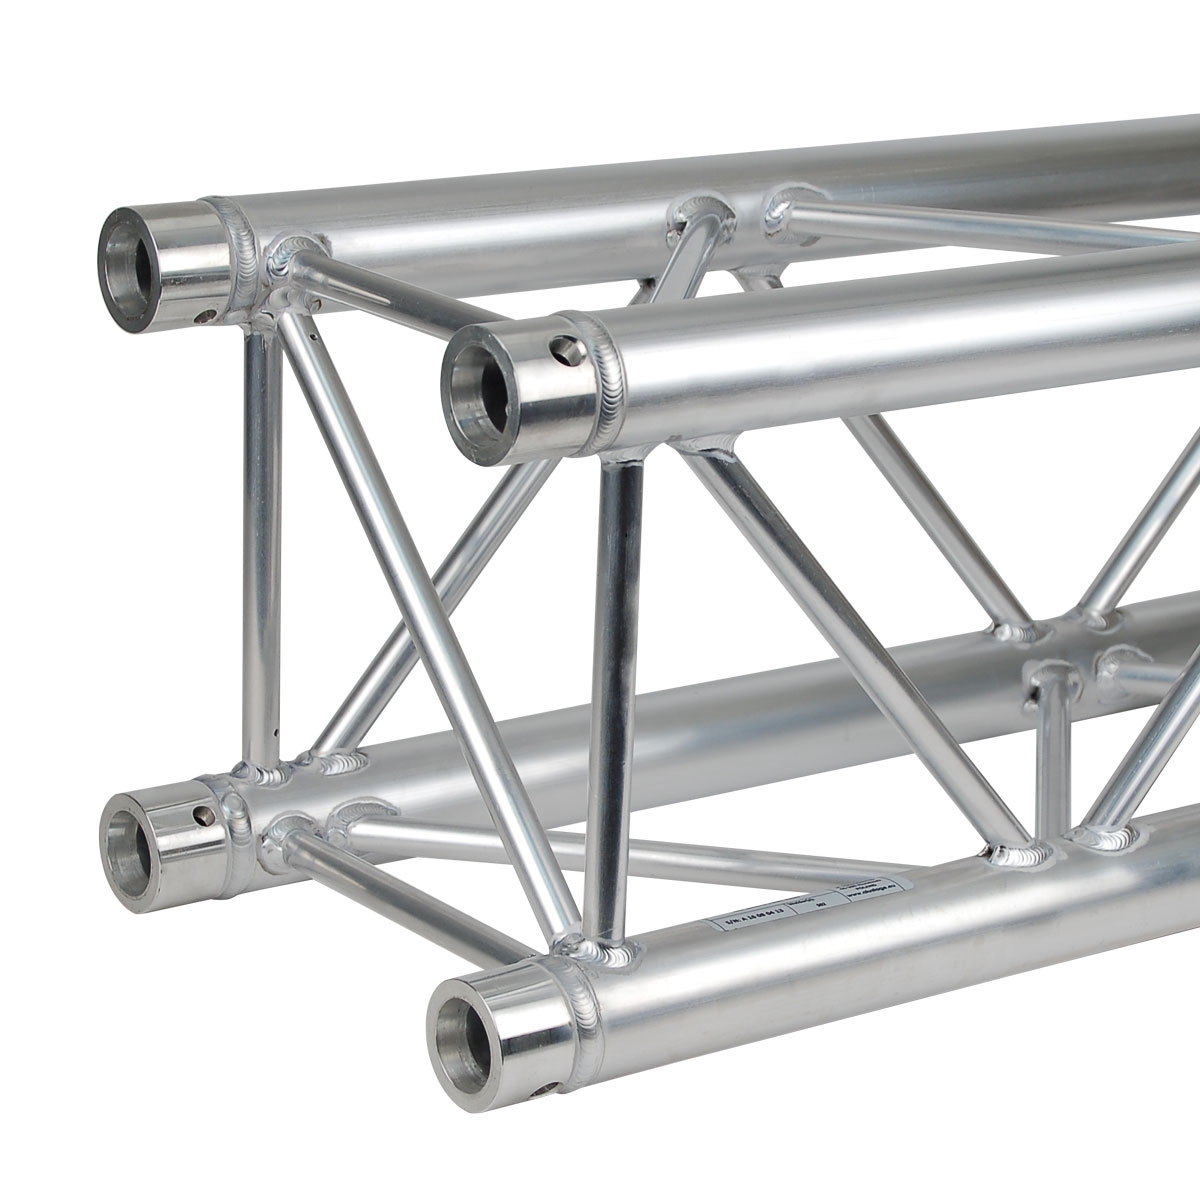 Square aluminium truss - Heavy duty - 290mm - Length 100cm - <strong>Connection kit included</strong>